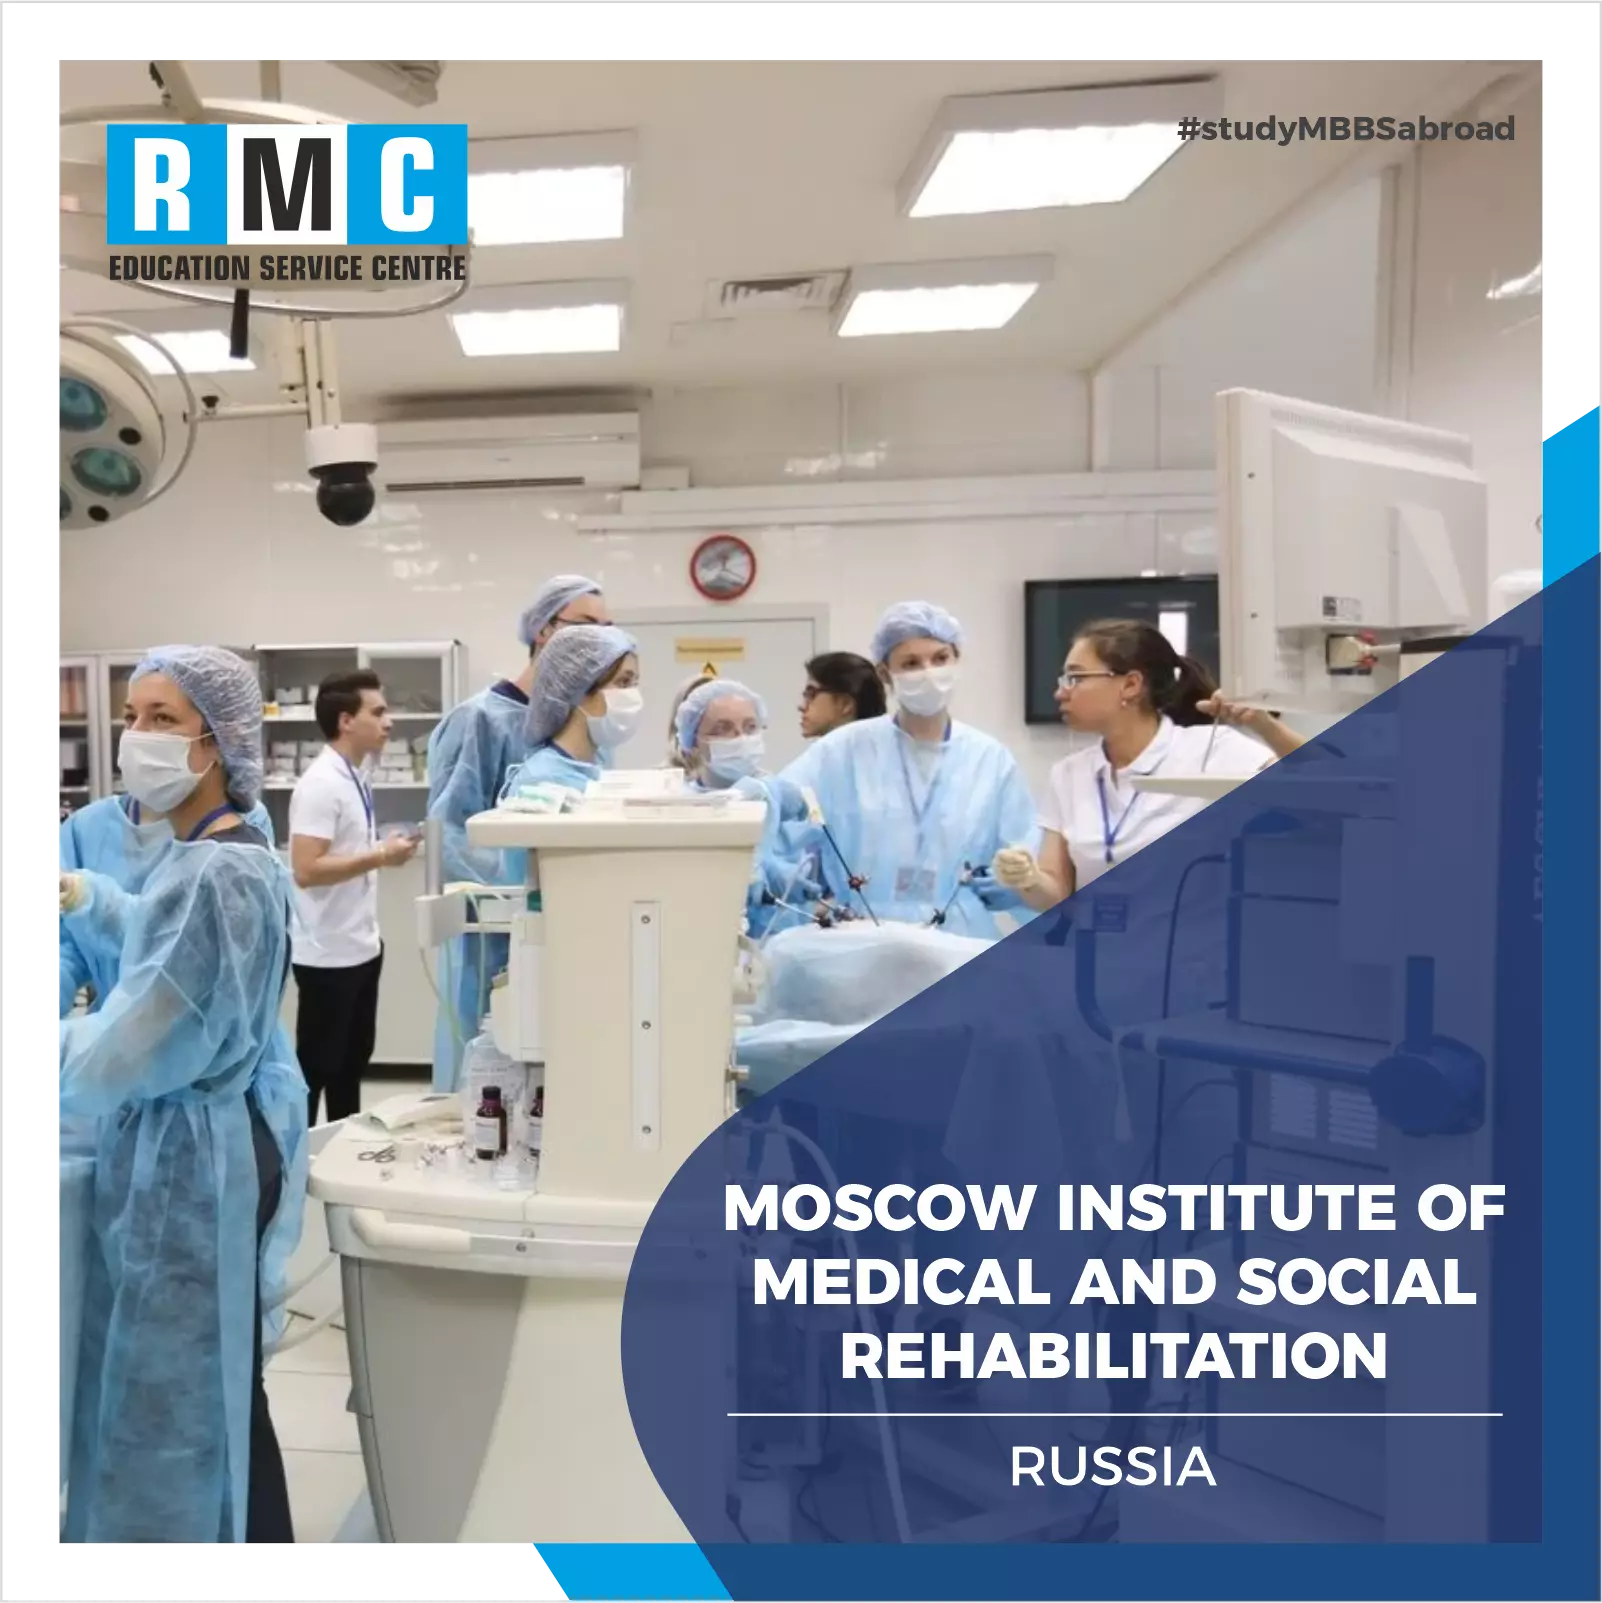 Moscow Institute of Medical and Social Rehabilitation